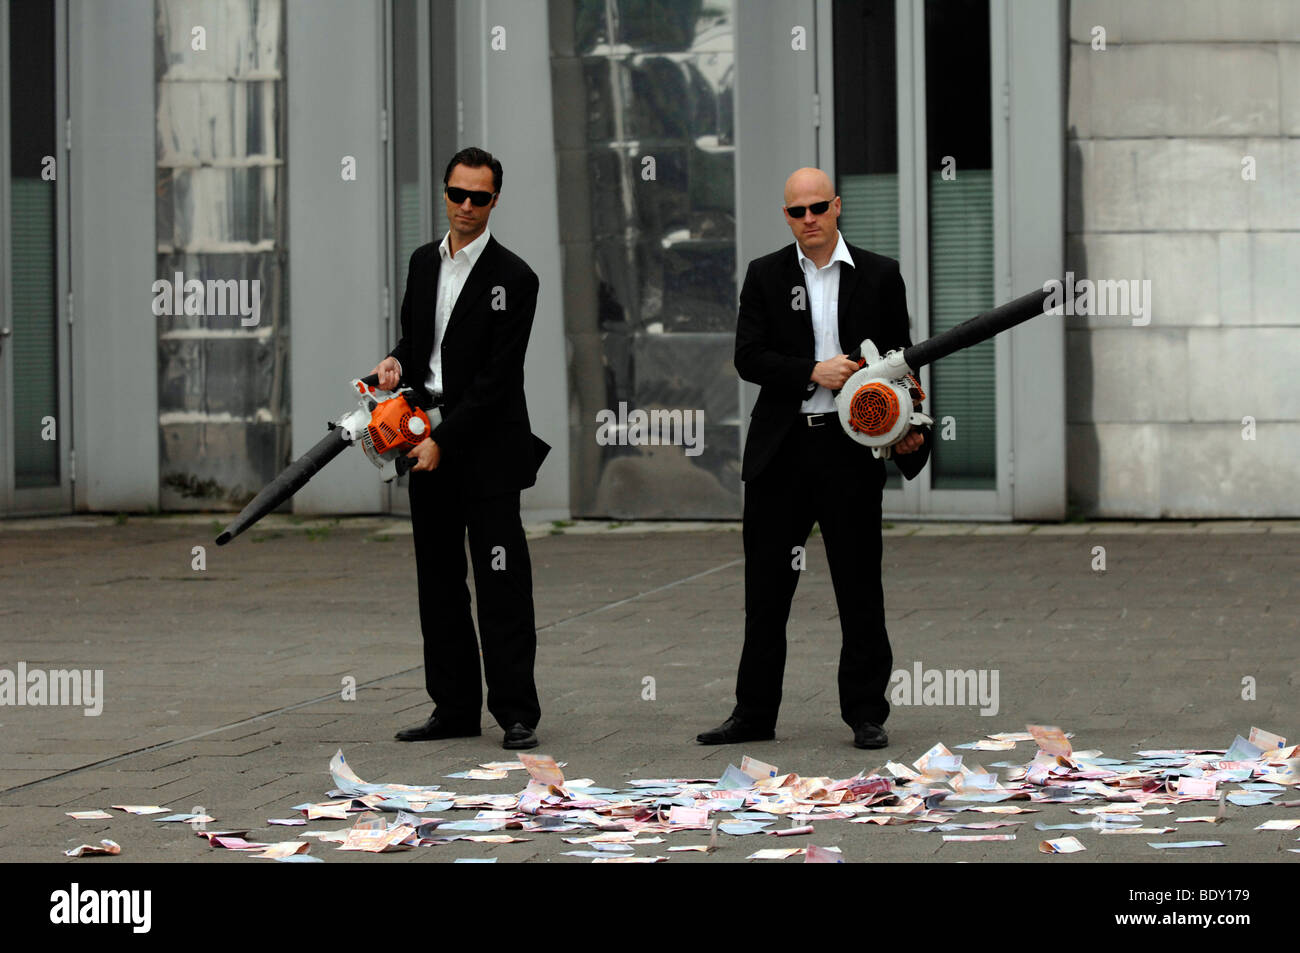 Men in Black, two business people with leaf blowers and banknotes, symbolic of waste of money Stock Photo